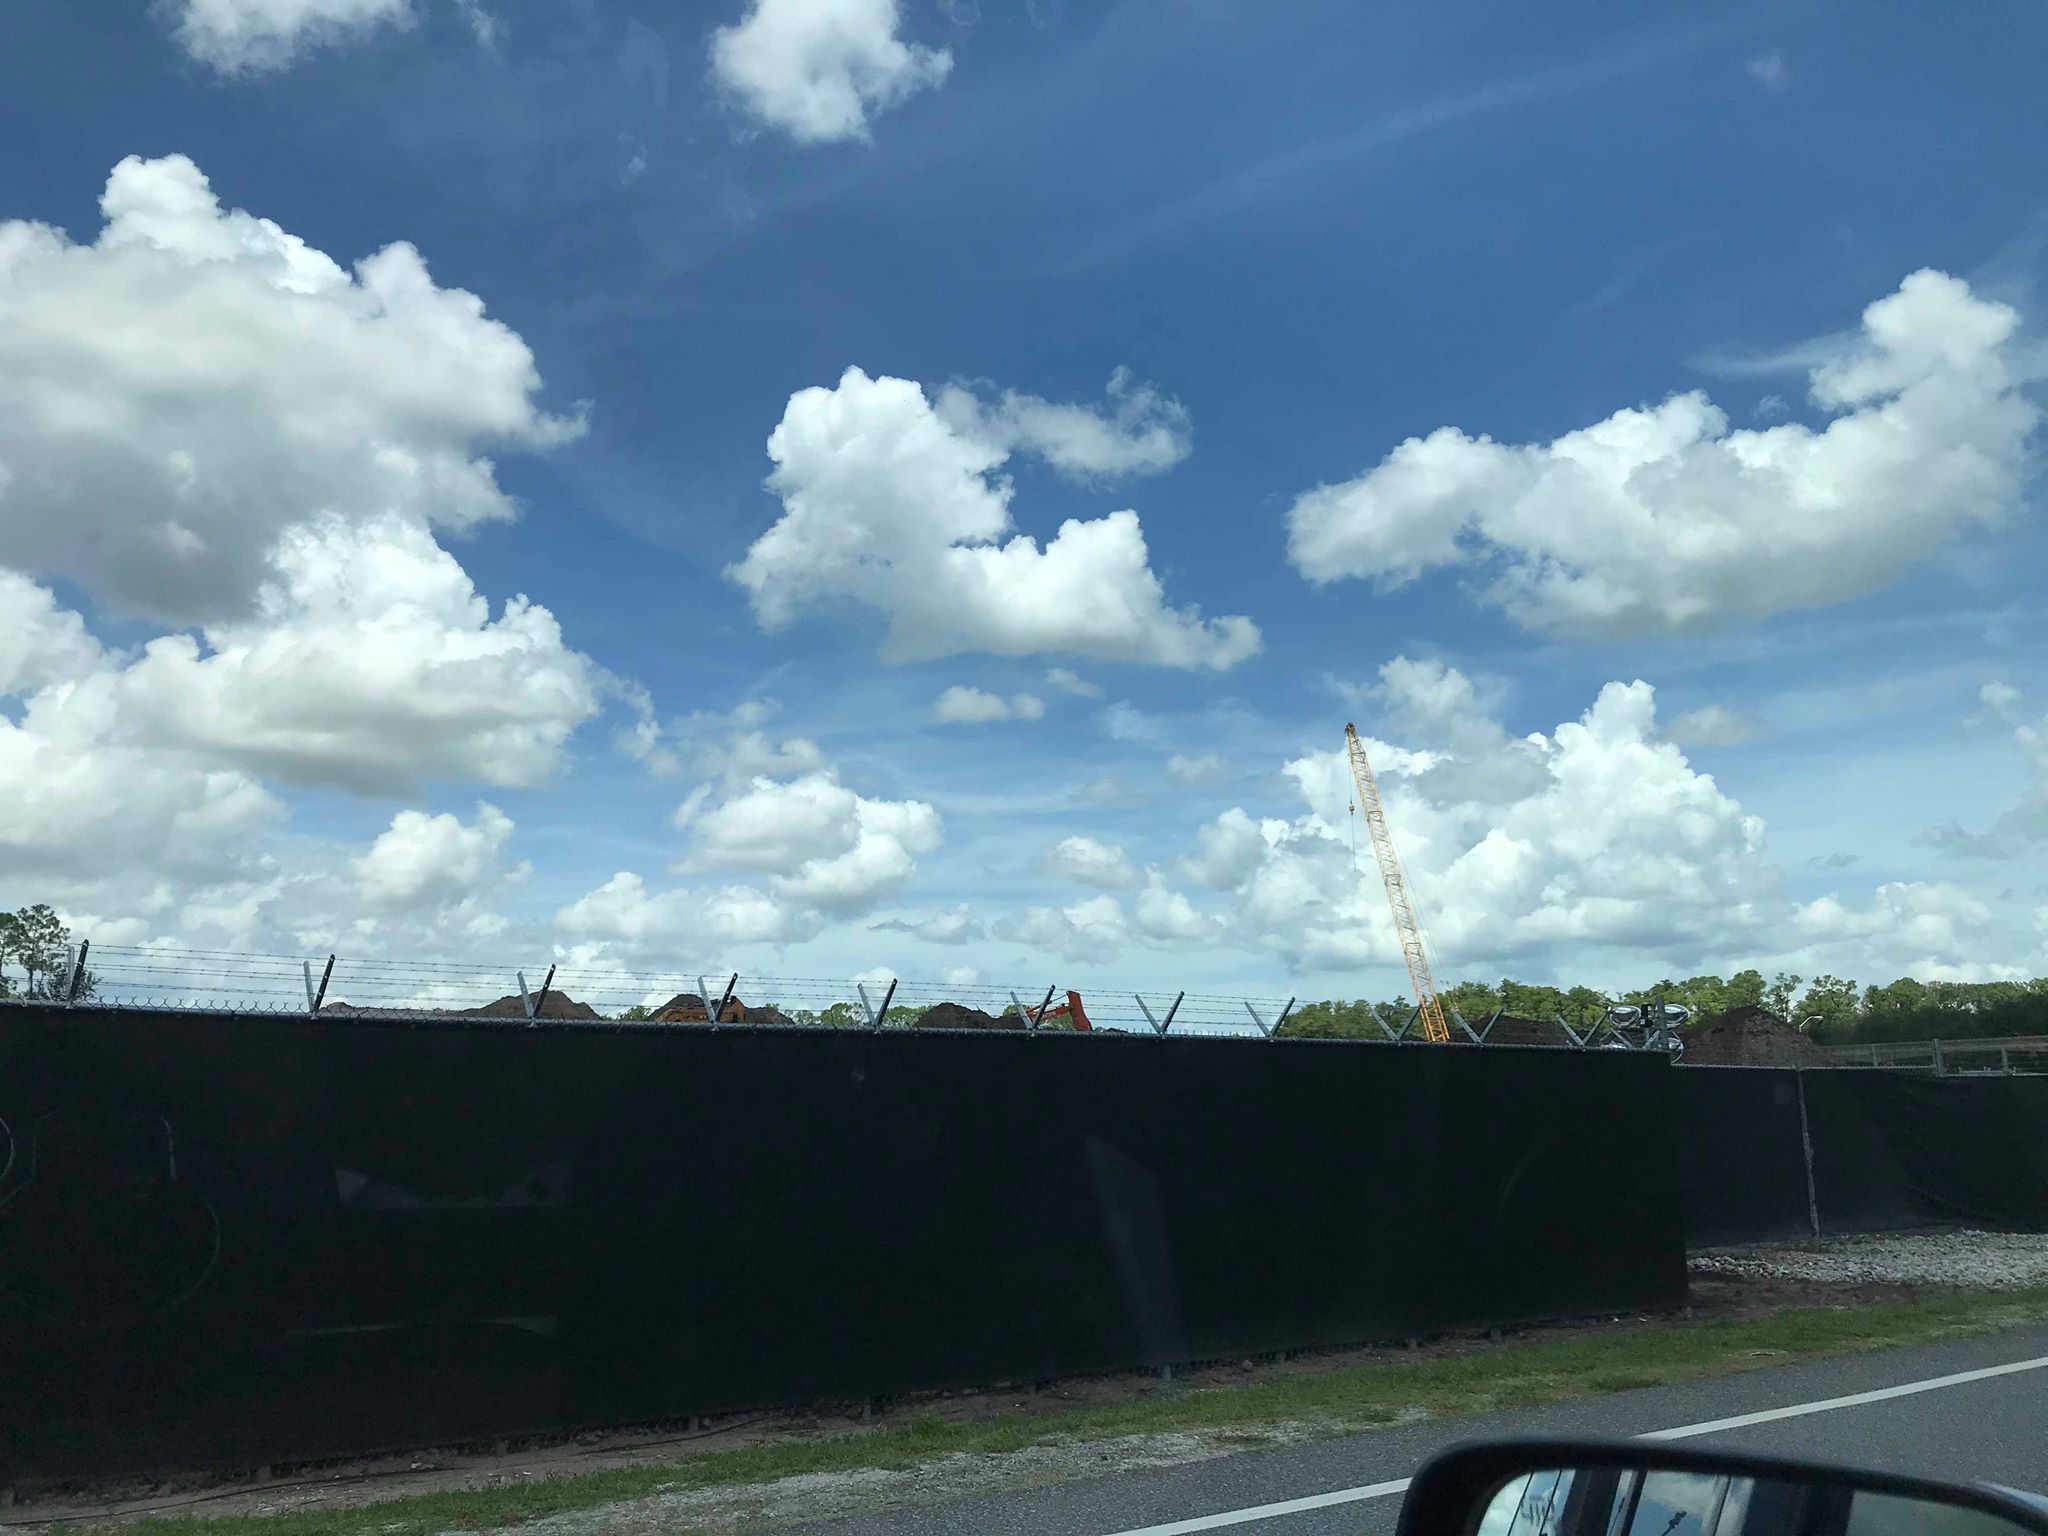 See How Construction is Coming Along for the Tron Coaster at Tomorrowland in the Magic Kingdom